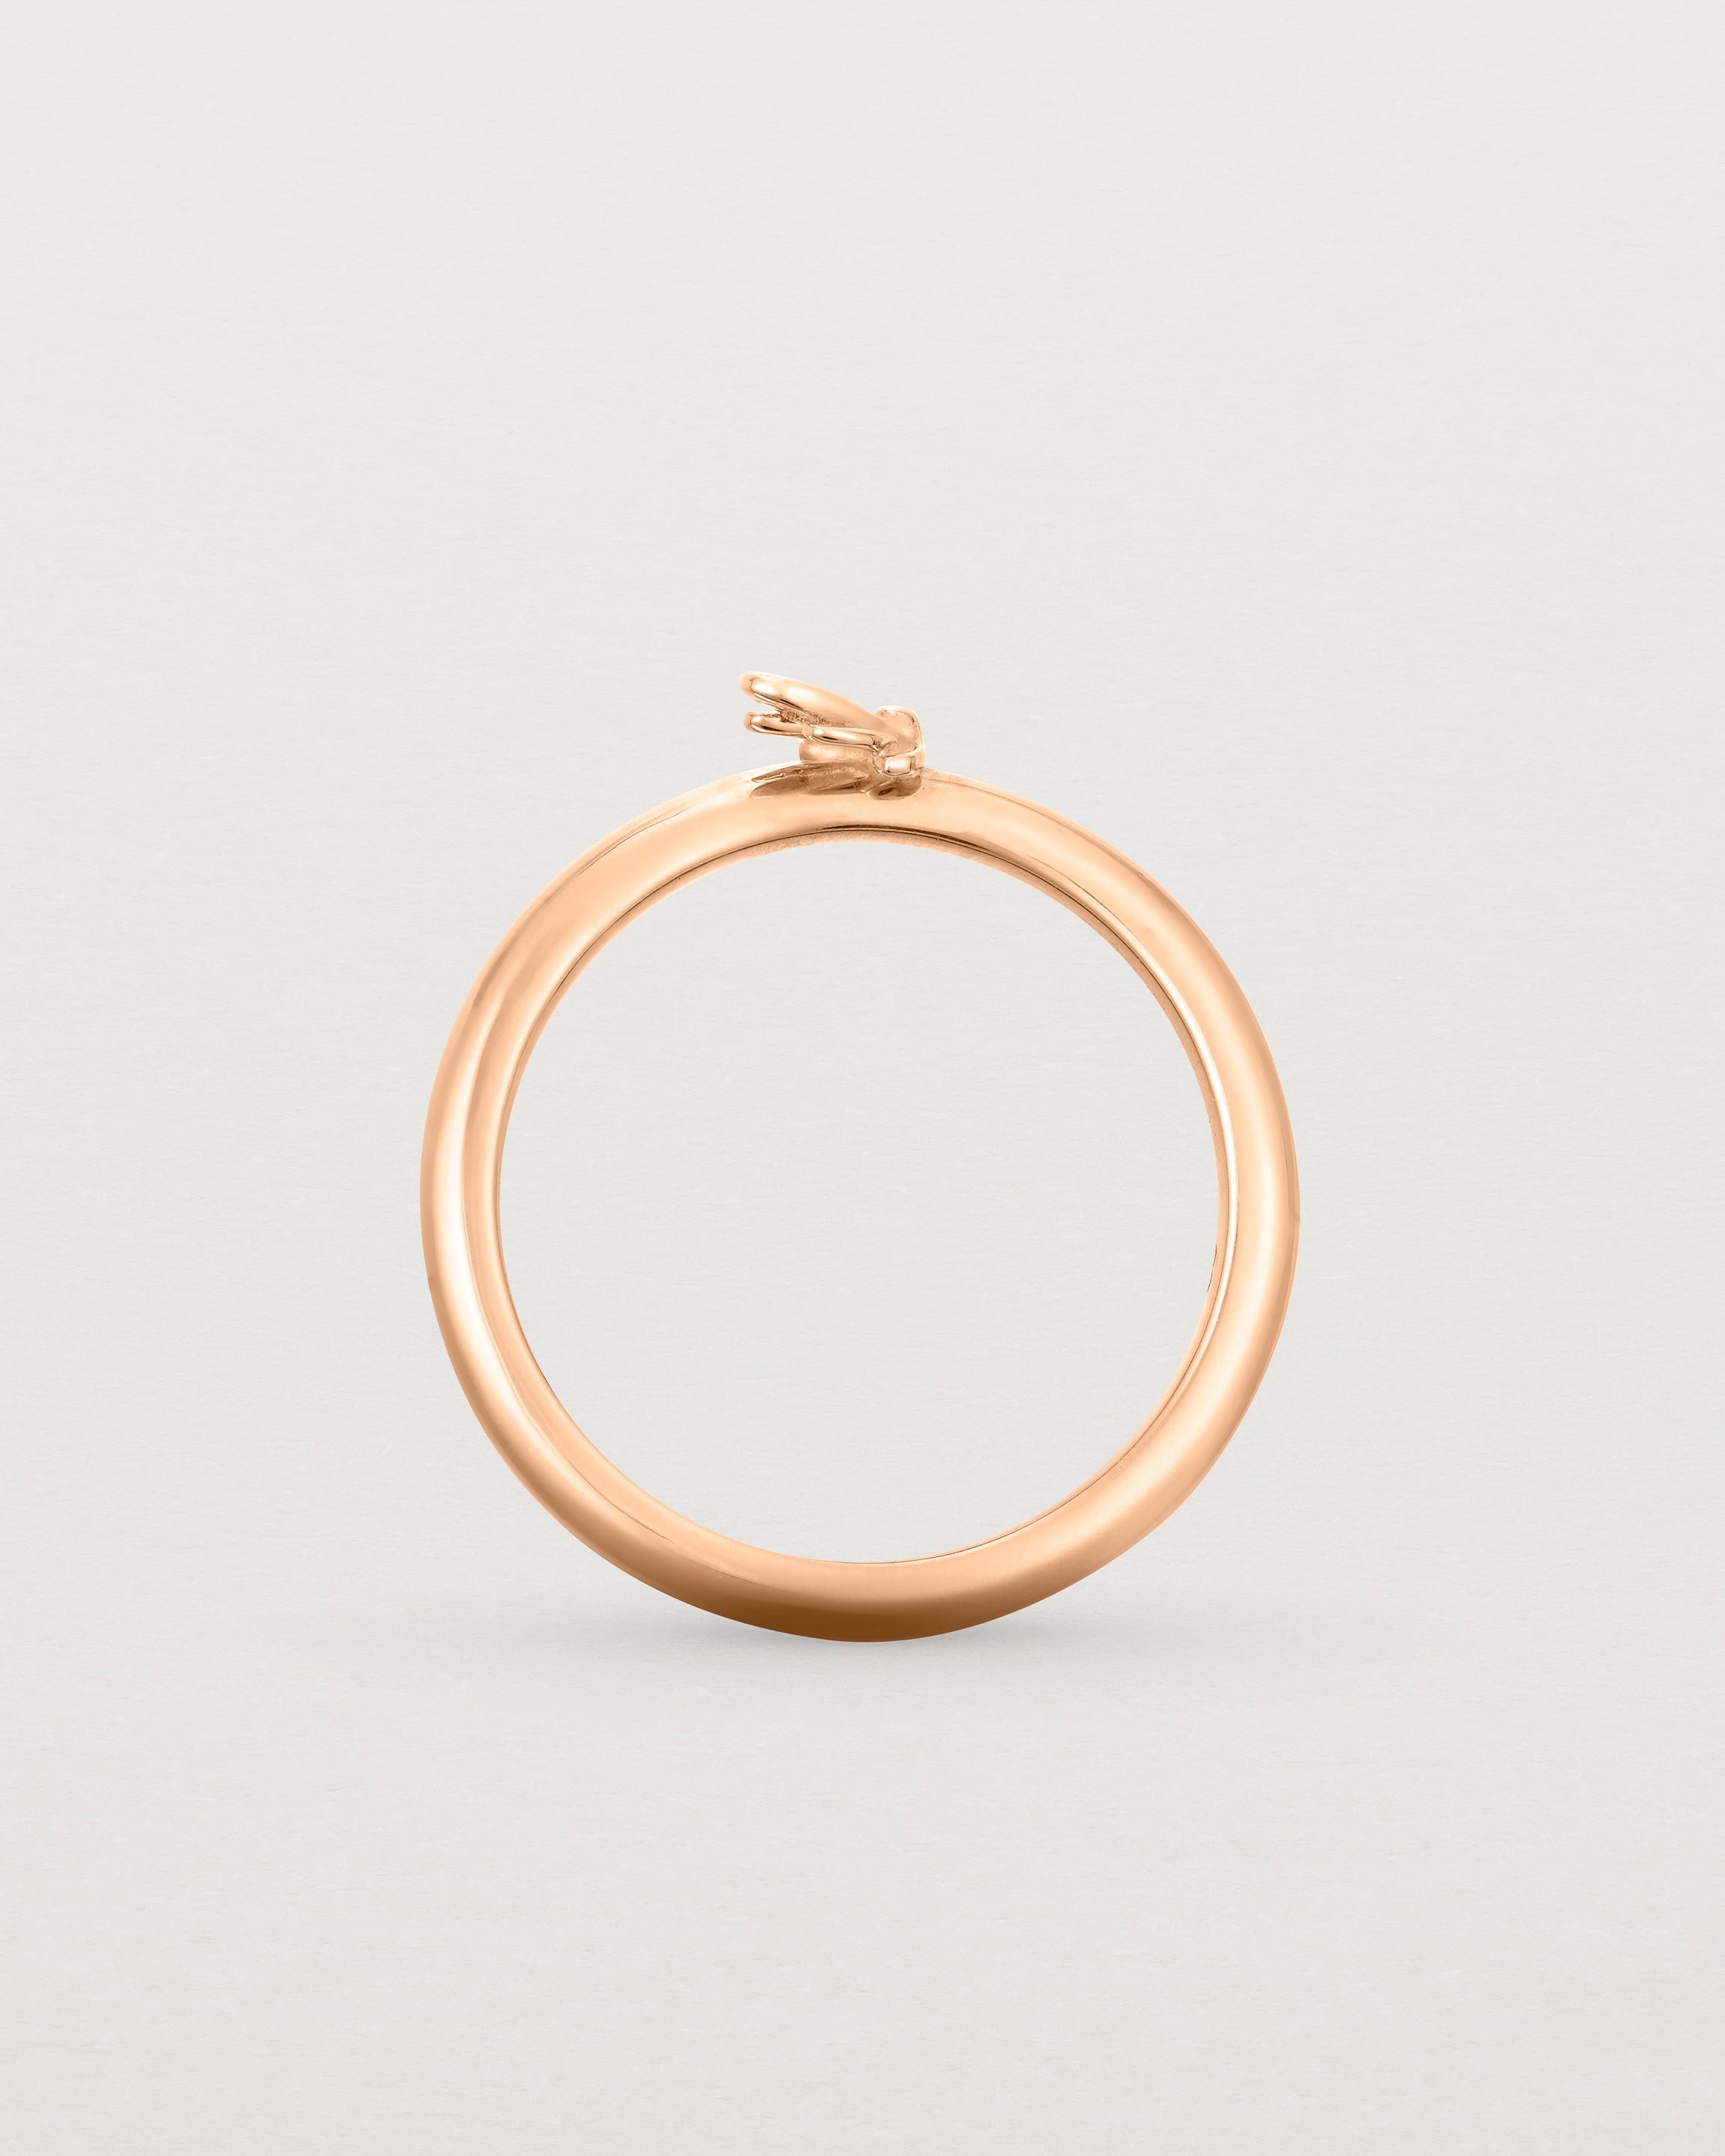 Standing view of the Aeris Stacking Ring in Rose Gold.